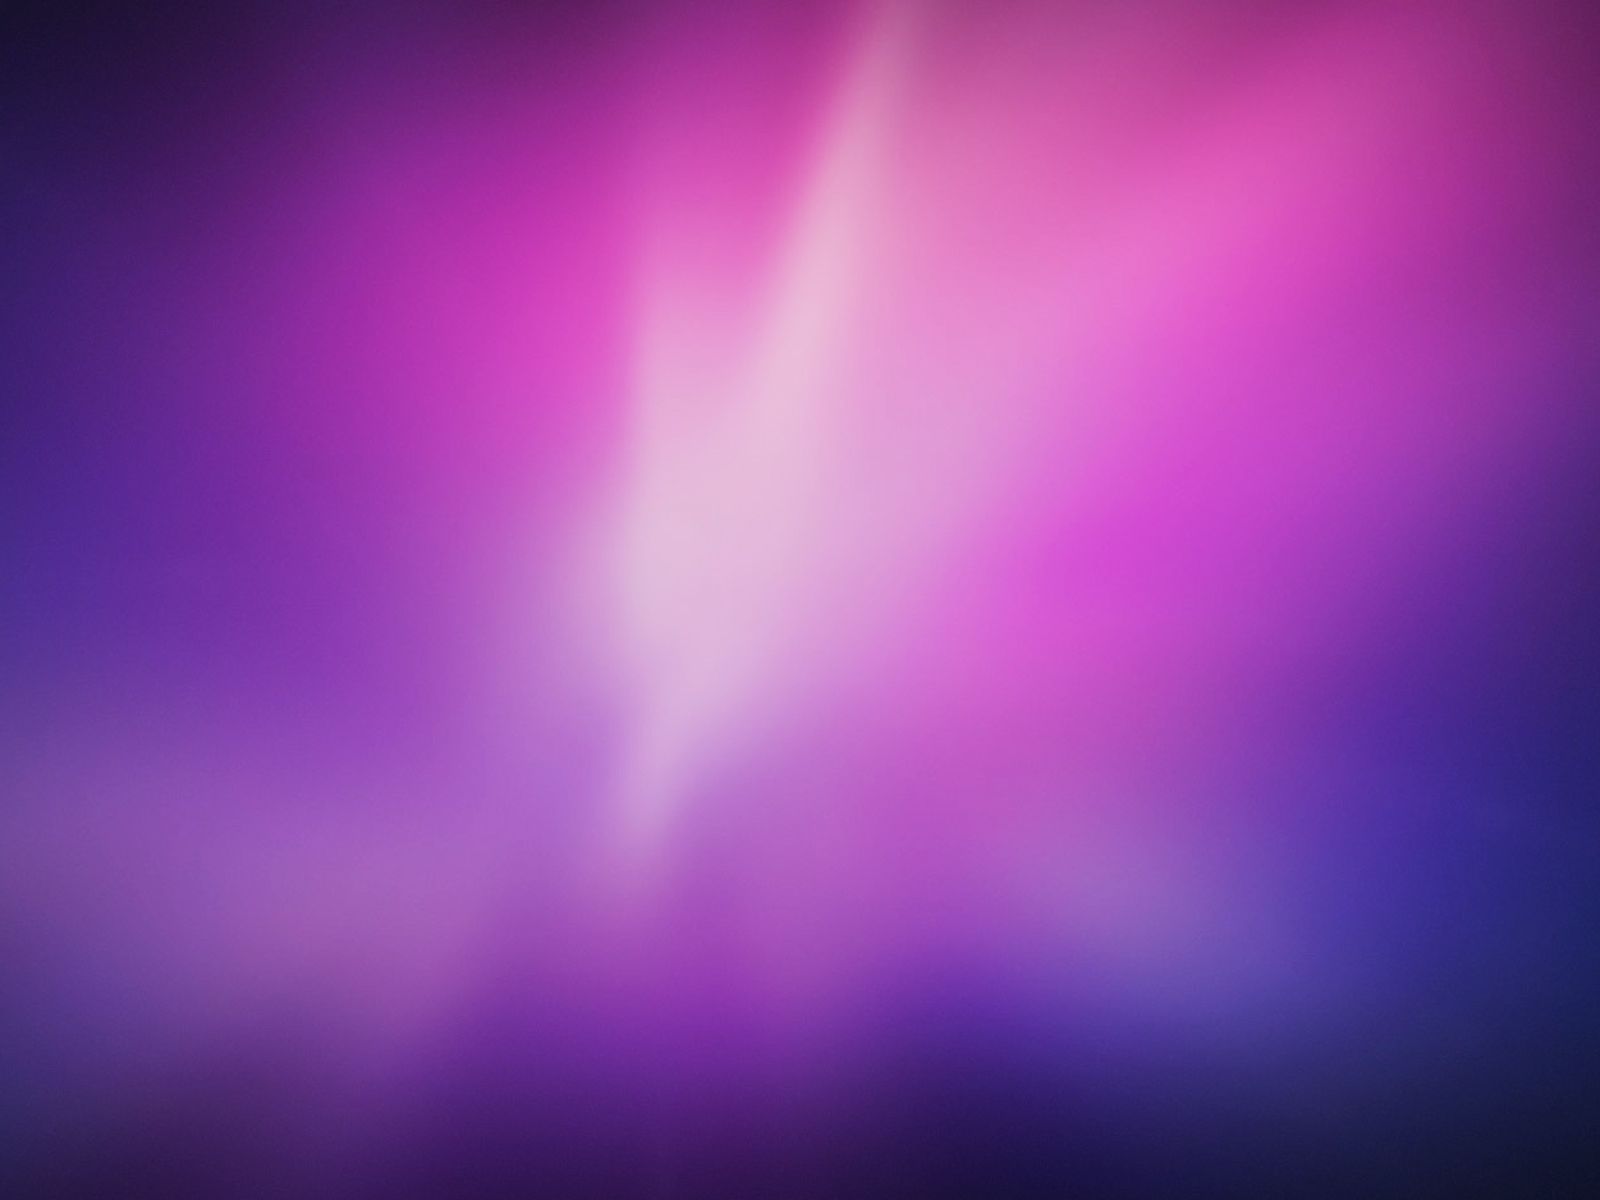 Apple Macbook Templates Backgrounds - Abstract, Pink, Purple ...